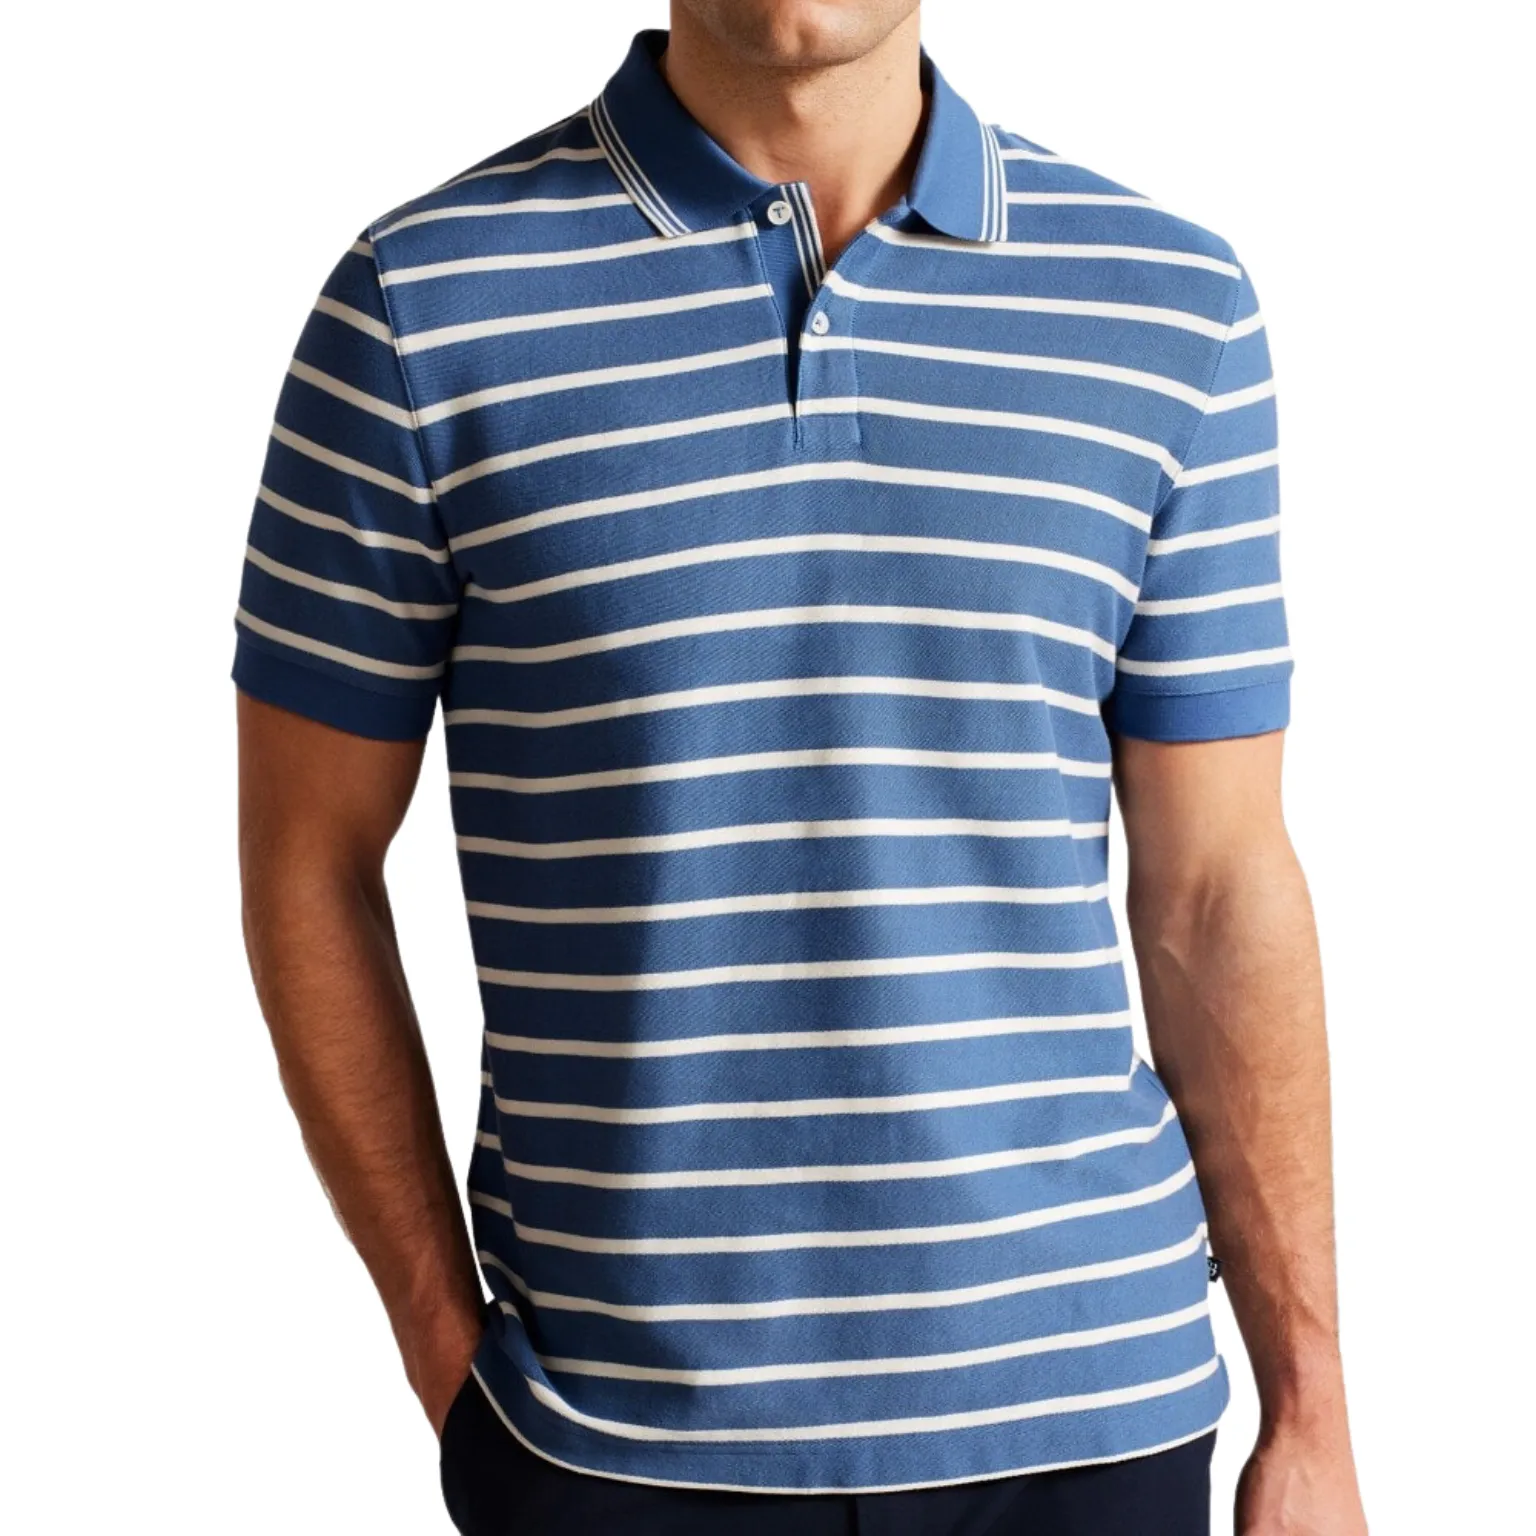 Striped Polo Shirts manufacturing with trendy design